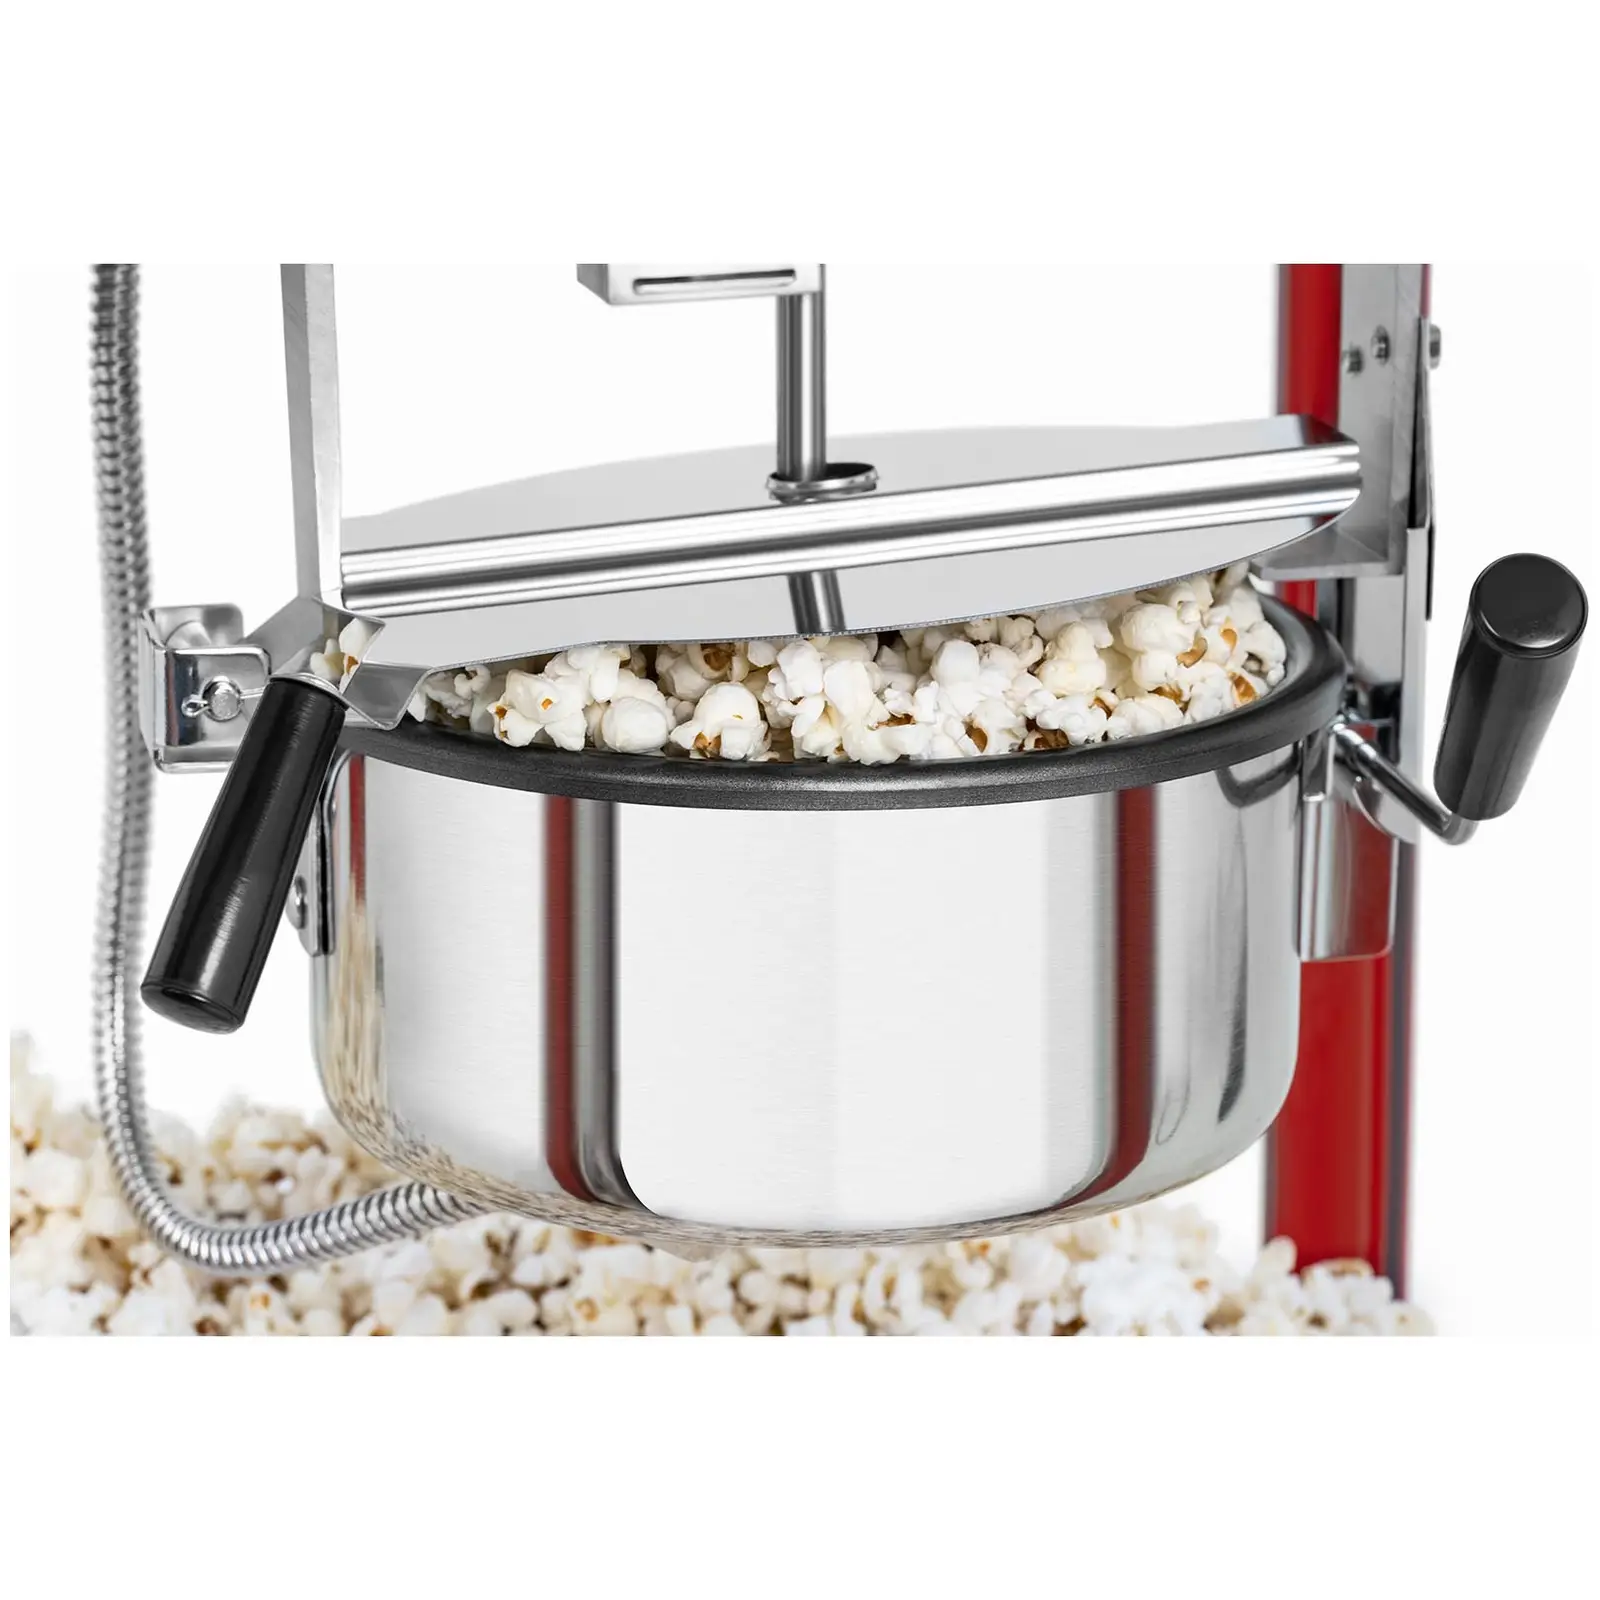 Small Popcorn Machine - 1600 W, stainless steel, tempered glass and Teflon